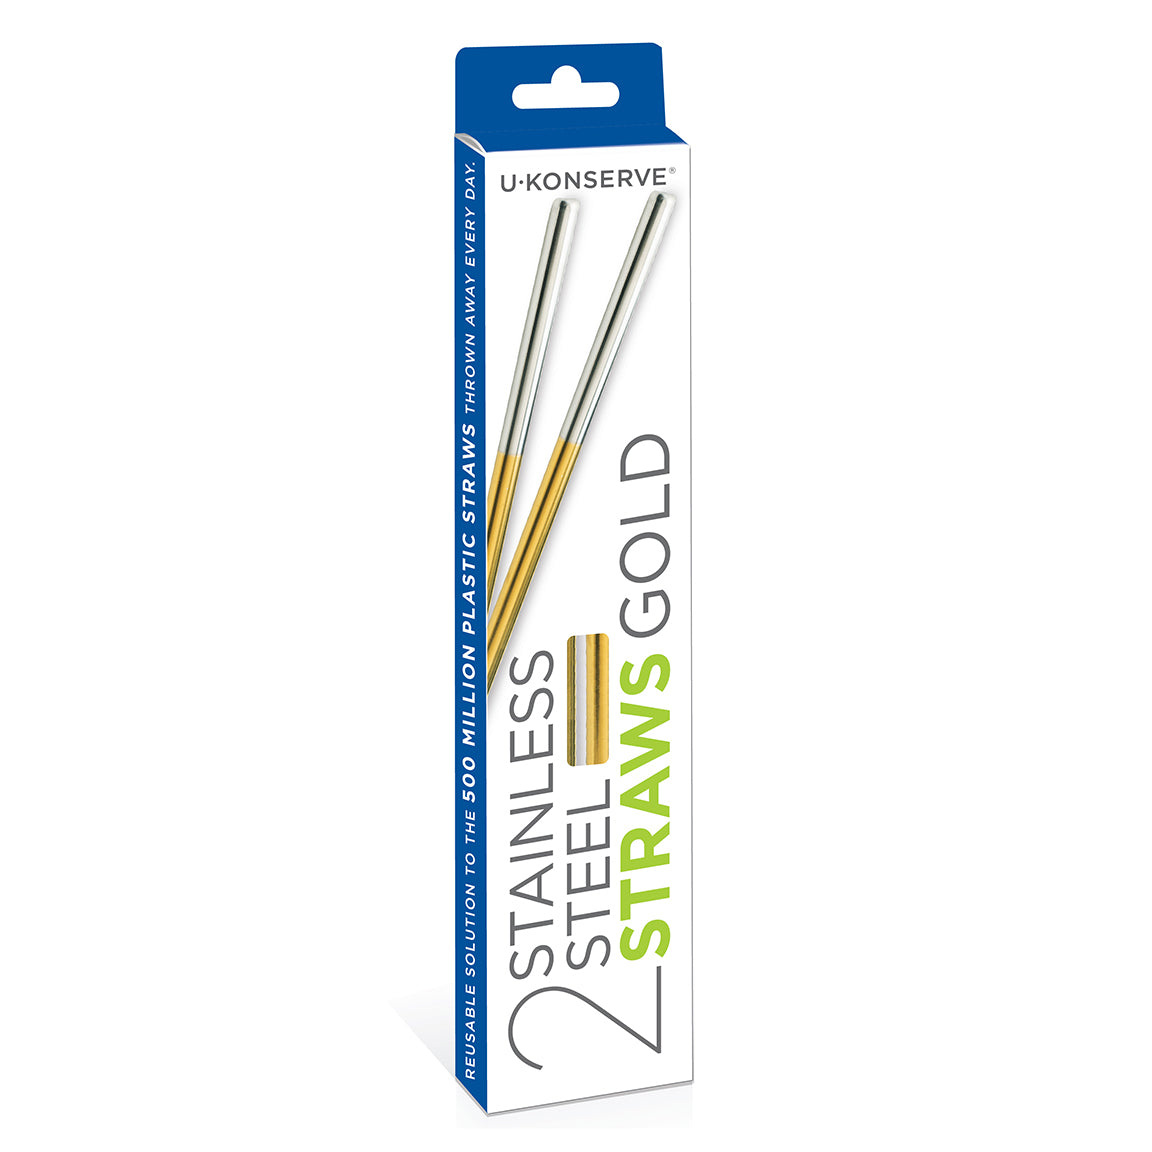 American Metalcraft STWC6 6 Copper Stainless Steel Reusable Straight Straw  - 12/Pack